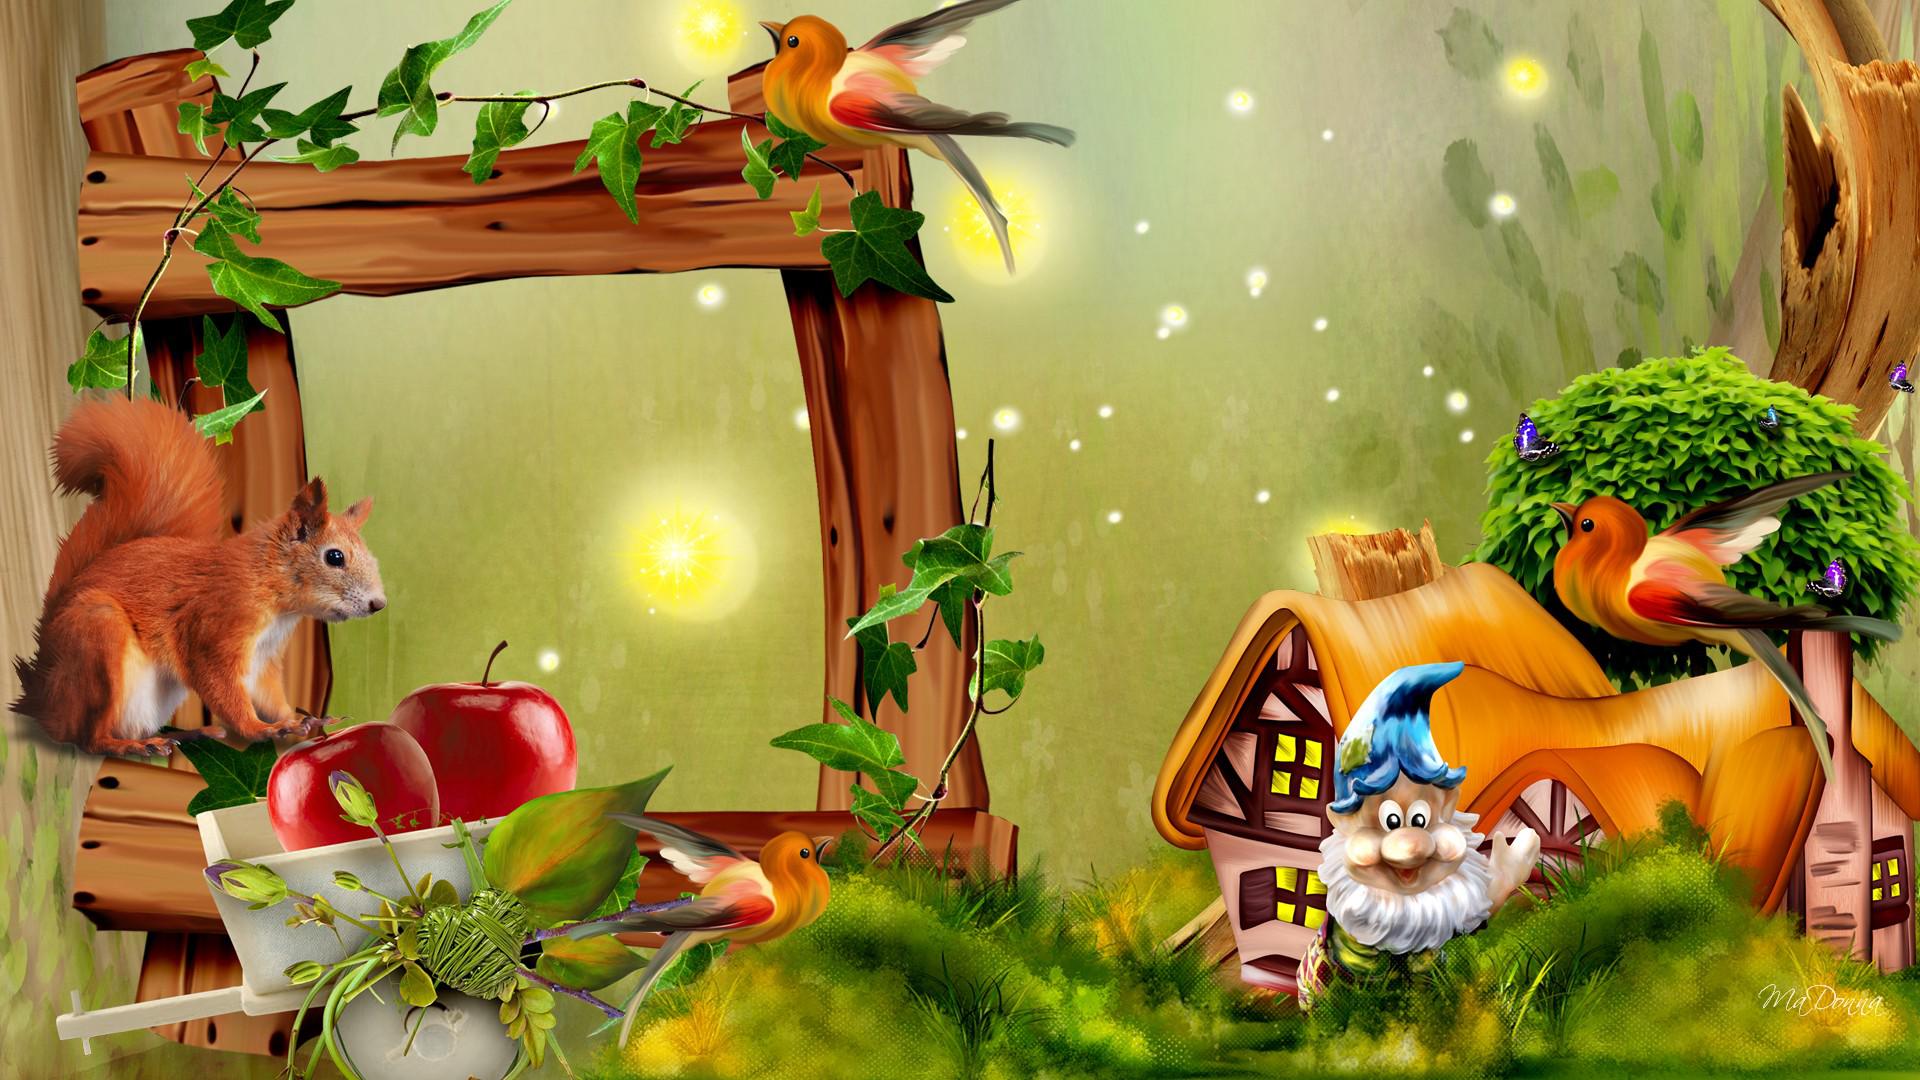 Gnome Village High Quality And Resolution Wallpaper On